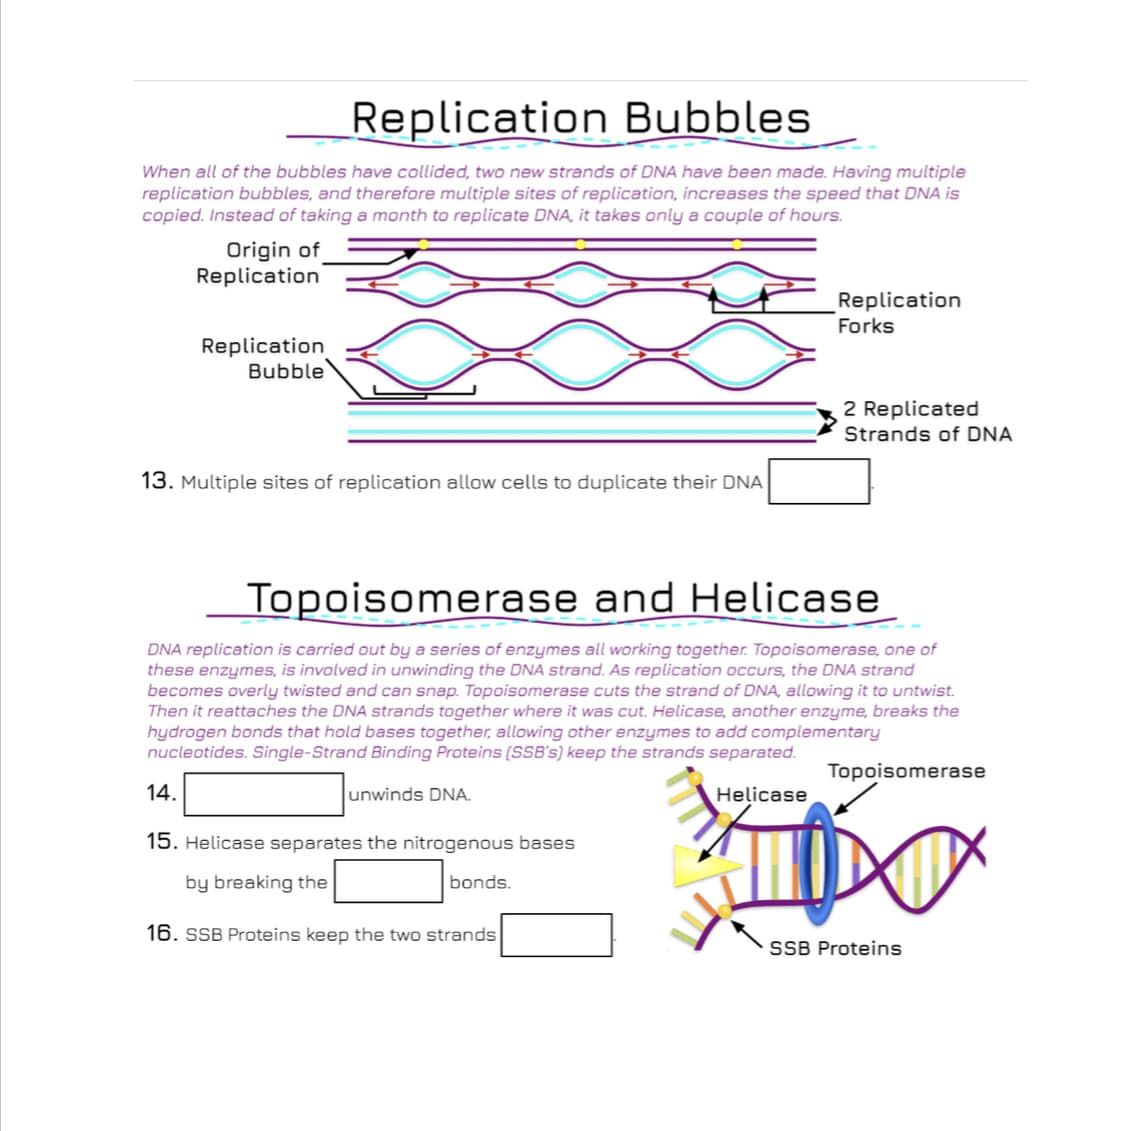 Replication Bubbles
When all of the bubbles have collided, two new strands of DNA have been made. Having multiple
replication bubbles, and therefore multiple sites of replication, increases the speed that DNA is
copied. Instead of taking a month to replicate DNA, it takes only a couple of hours.
Origin of
Replication
Replication
Forks
Replication
Bubble
2 Replicated
Strands of DNA
13. Multiple sites of replication allow cells to duplicate their DNA
Topoisomerase and Helicase
DNA replication is carried out by a series of enzymes all working together. Topoisomerase, one of
these enzymes, is involved in unwinding the DNA strand. As replication occurs, the DNA strand
becomes overly twisted and can snap. Topoisomerase cuts the strand of DNA, allowing it to untwist.
Then it reattaches the DNA strands together where it was cut. Helicase, another enzyme, breaks the
hydrogen bonds that hold bases together, allowing other enzymes to add complementary
nucleotides. Single-Strand Binding Proteins (SSB's) keep the strands separated.
Topoisomerase
14.
unwinds DNA.
Helicase
15. Helicase separates the nitrogenous bases
by breaking the
bonds.
16. SSB Proteins keep the two strands
SSB Proteins
